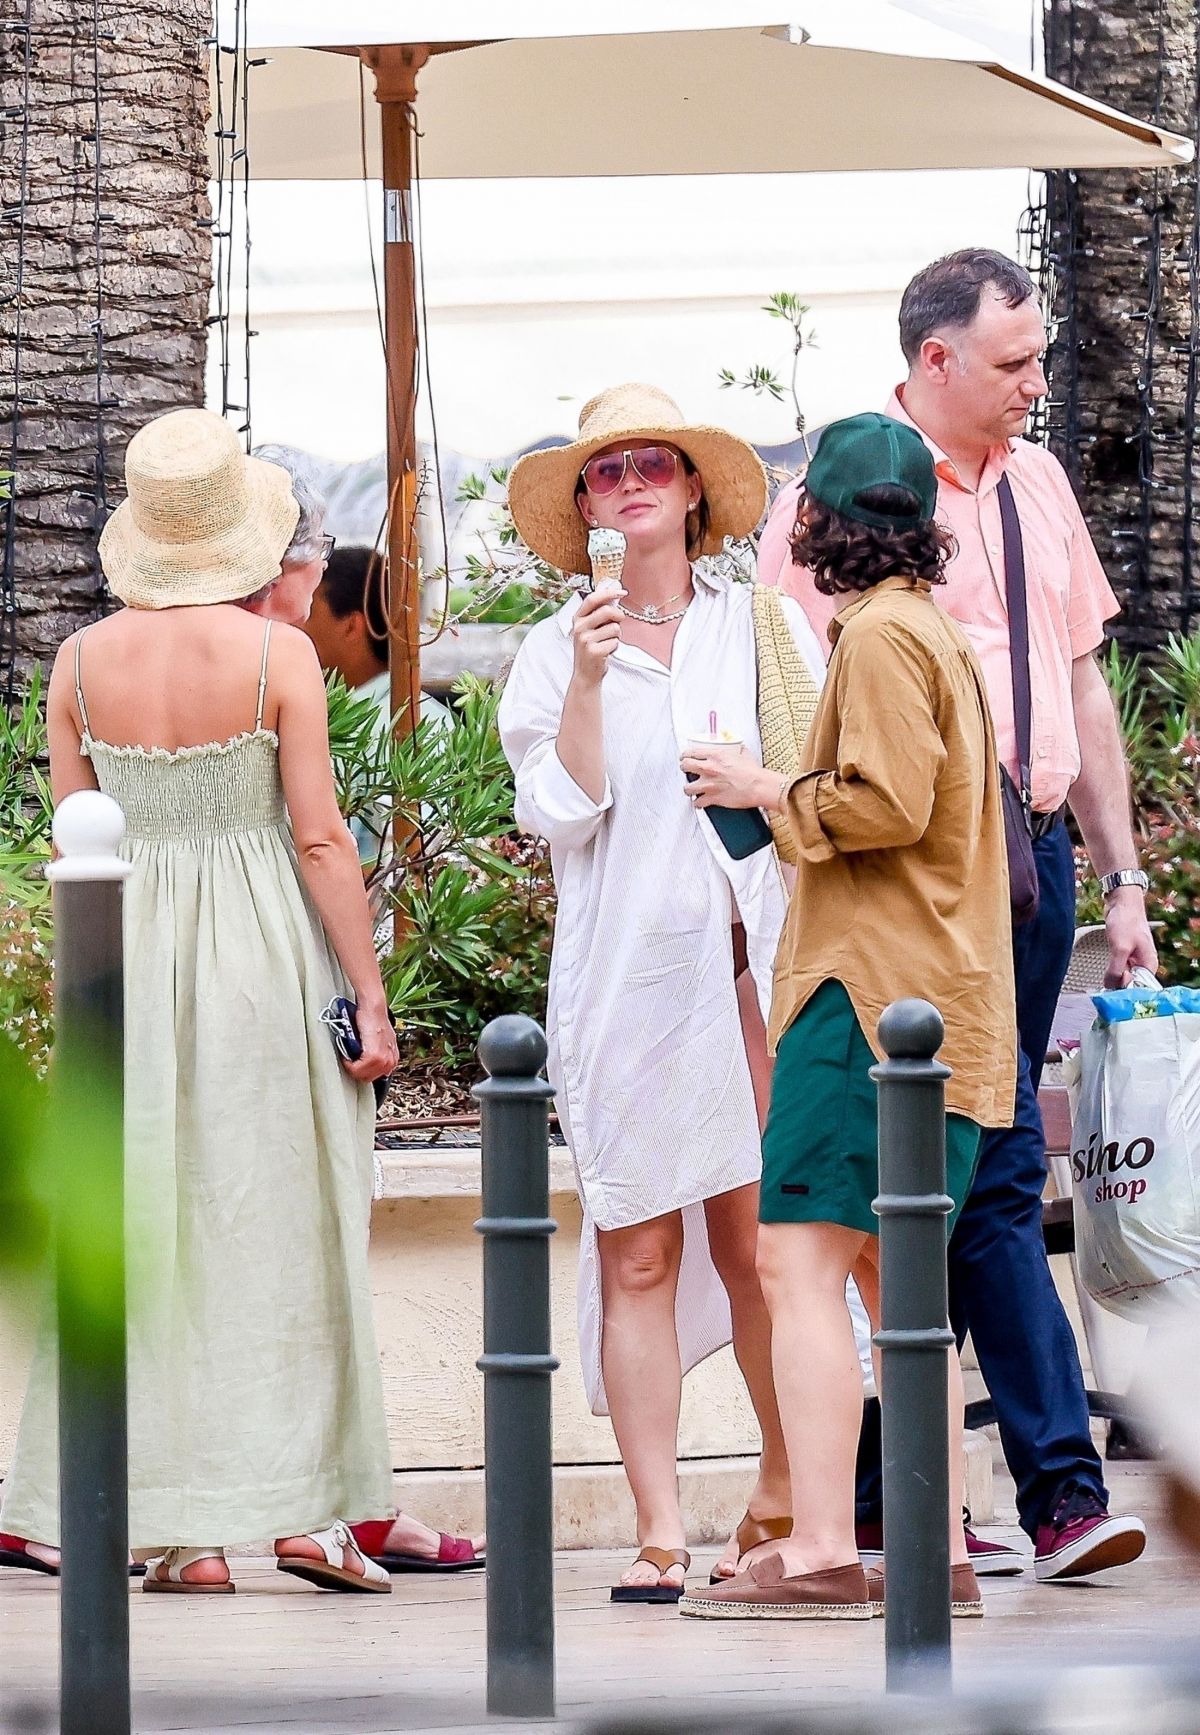 Katy Perry and Orlando Bloom Vacation at Gulf of Saint Tropez